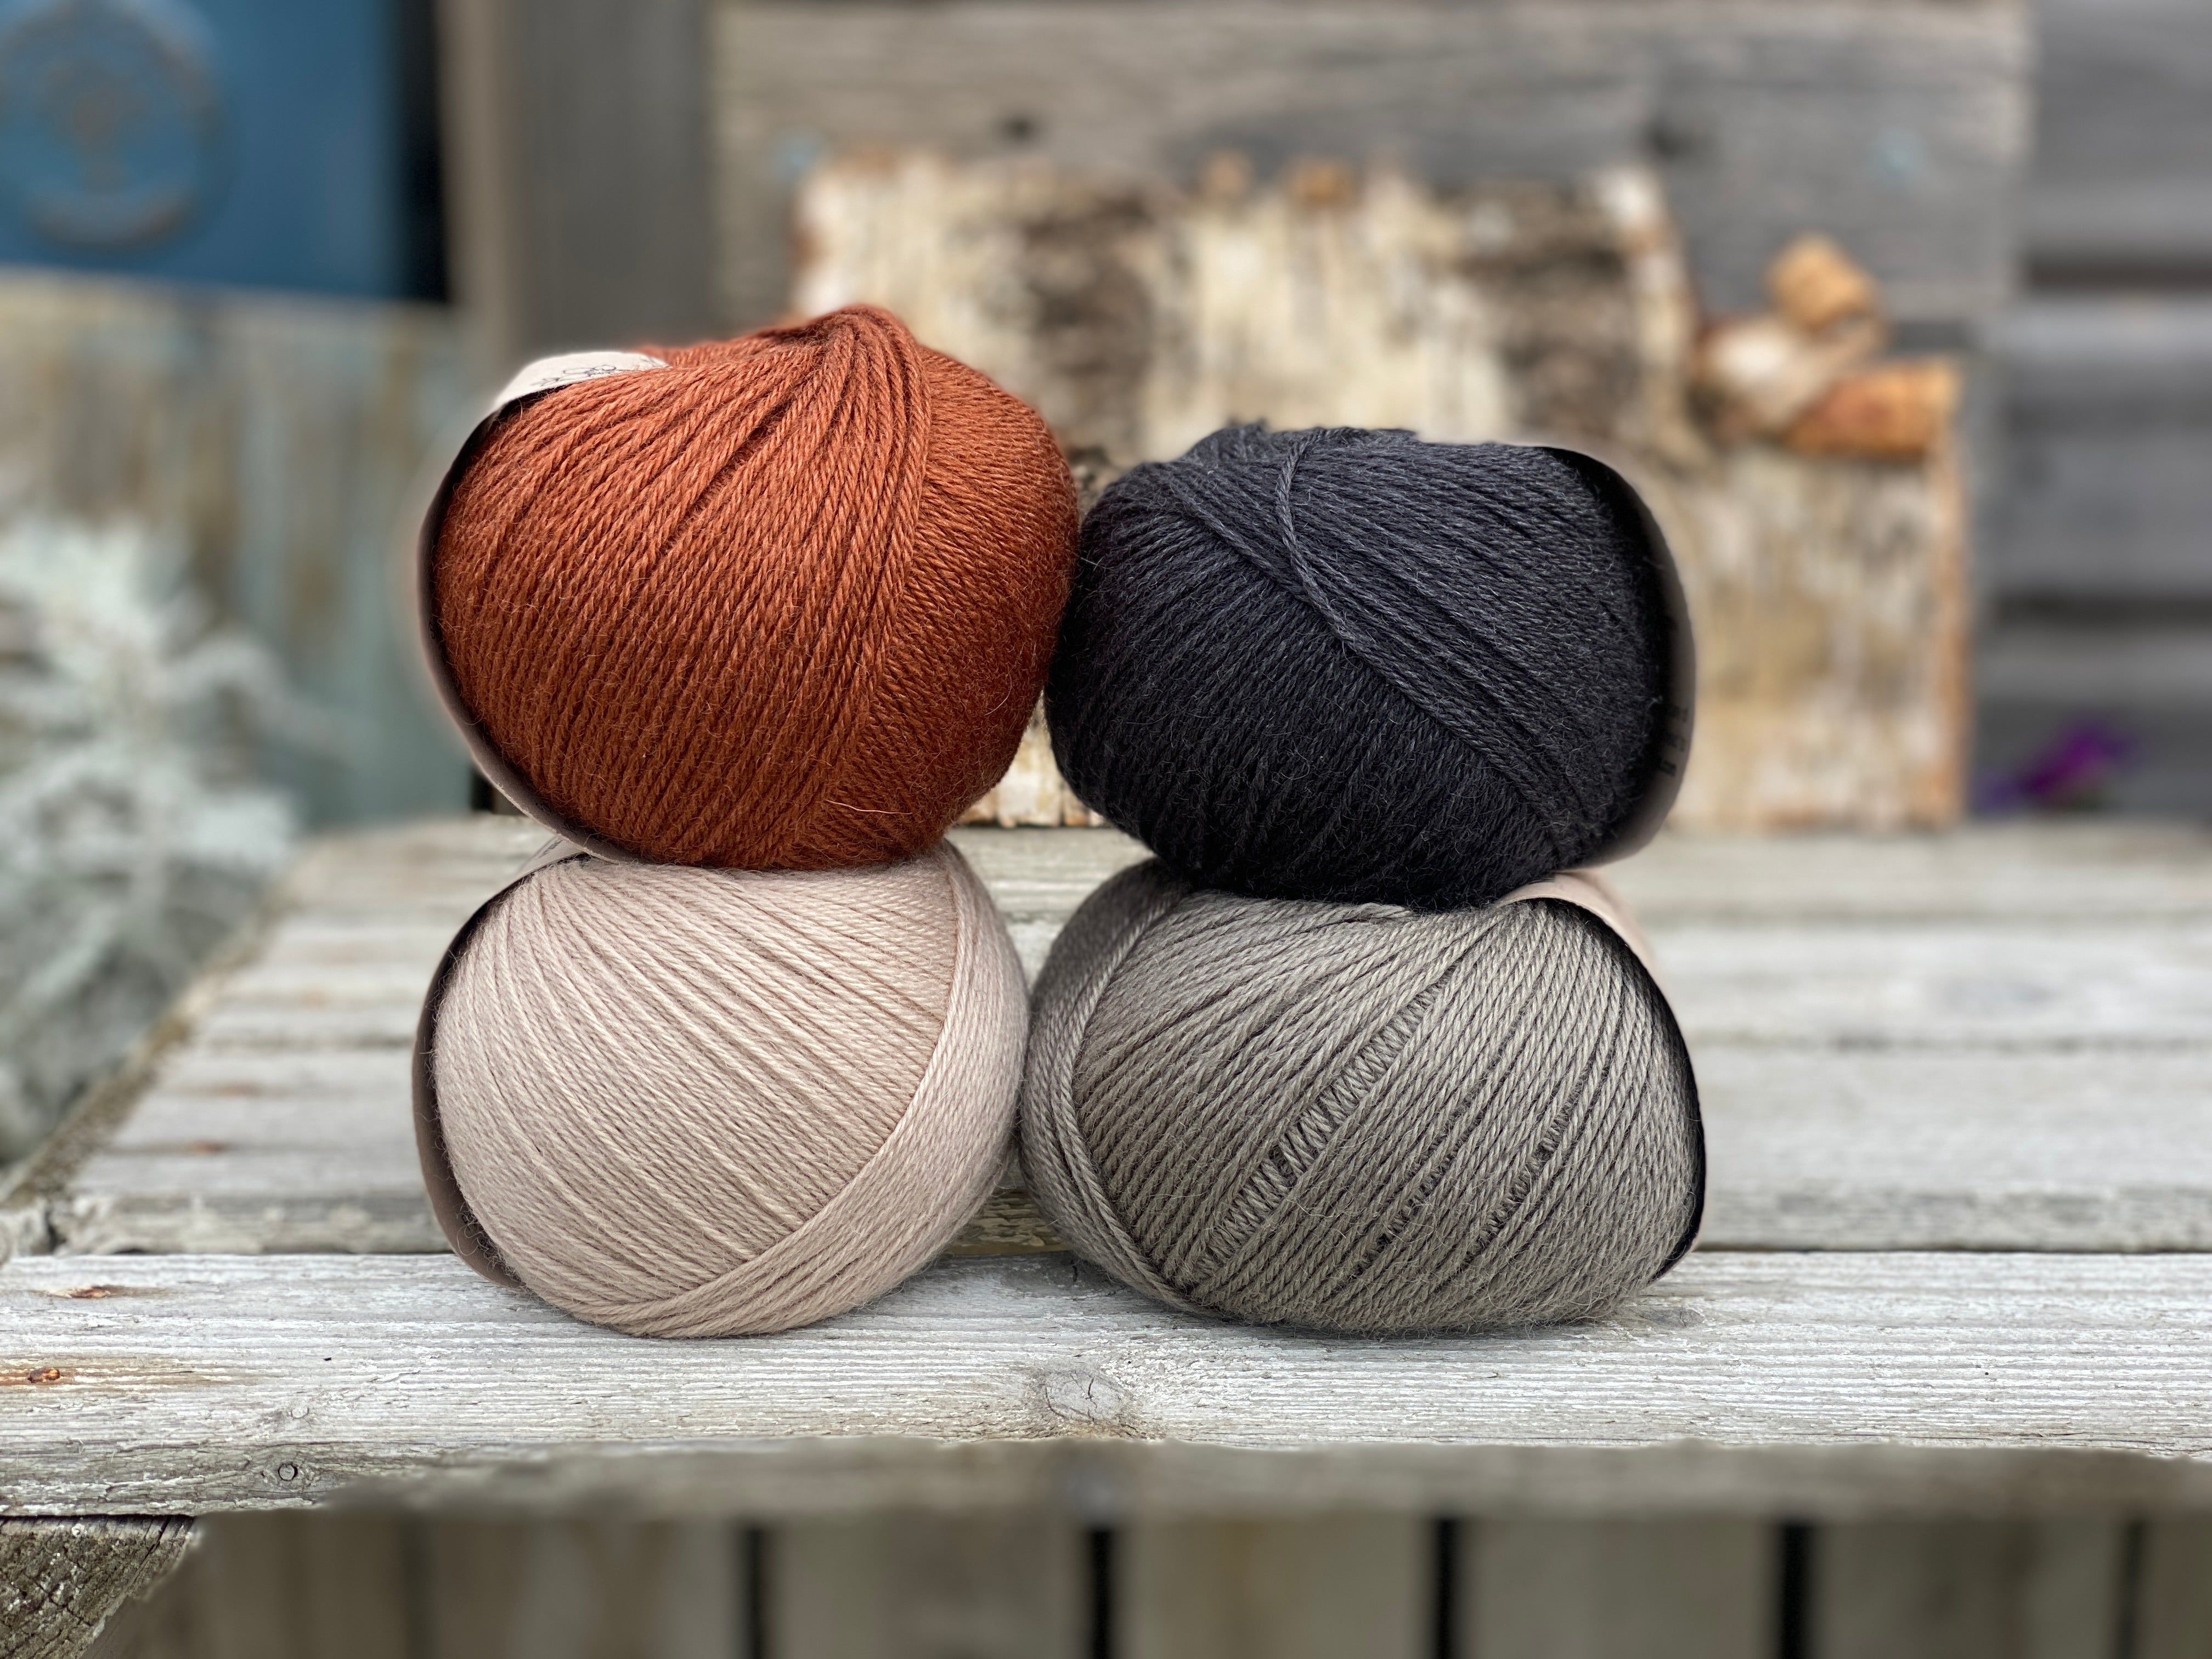 Four balls of yarn. There is a reddish-brown ball, a dark grey ball, a beige ball and a grey ball.